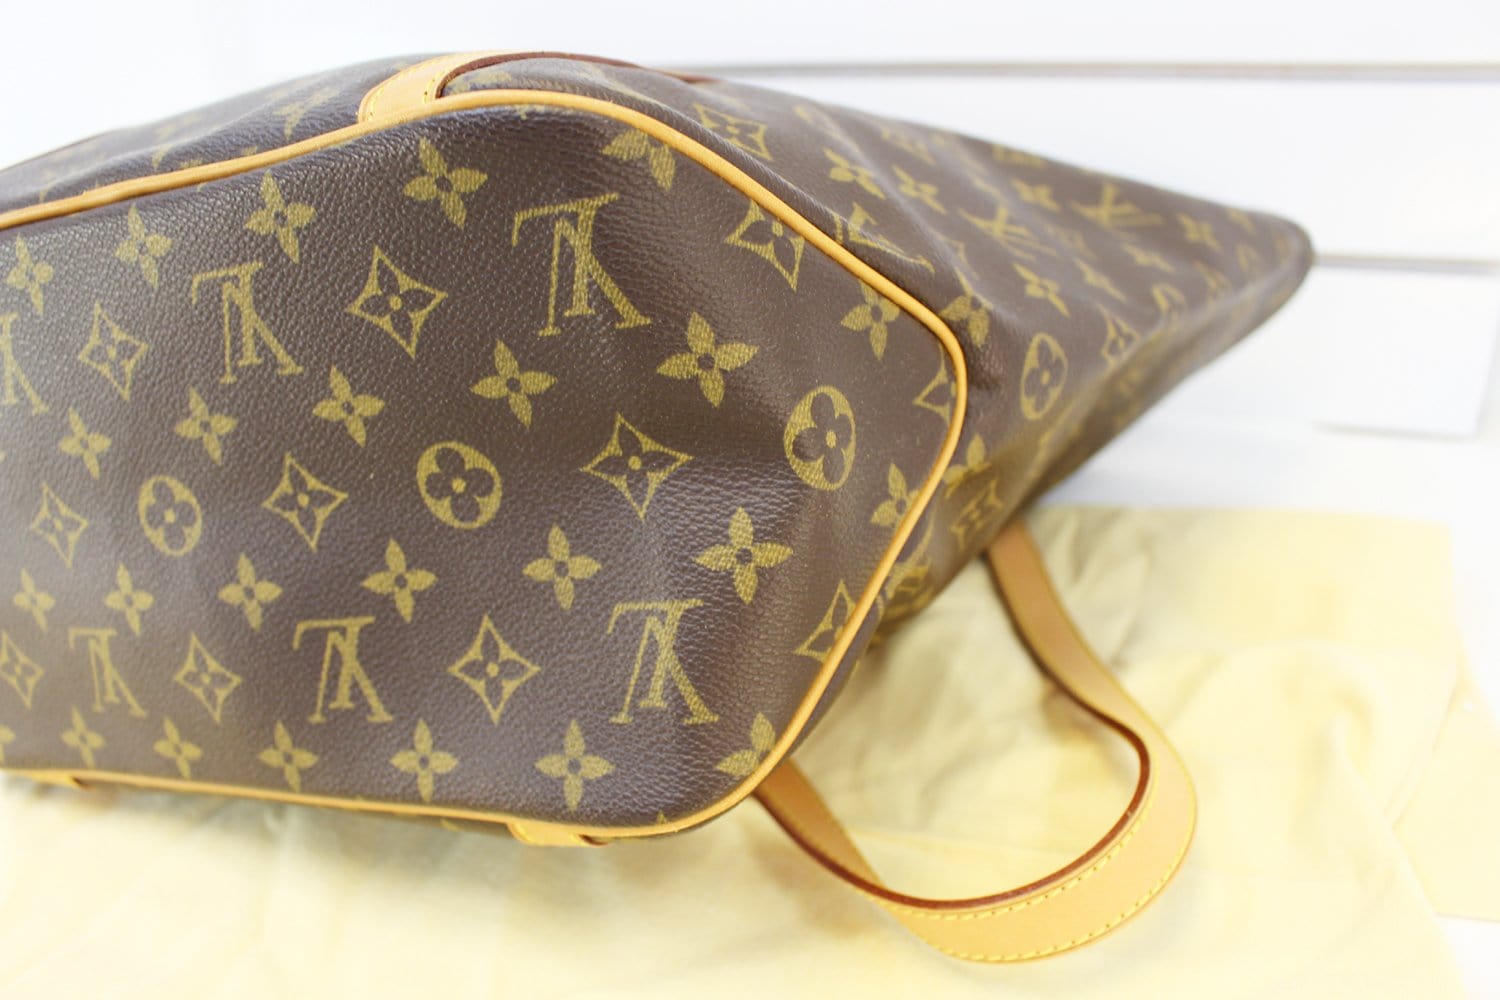 Real Deal Collection - Classic Louis Vuitton Sac Shopping Totelet's go  shopping!! #realdealcollection #downtownsantafe #shopsmallbusiness  #springbreak #shopconsignment #vintagebags #louisvuitton